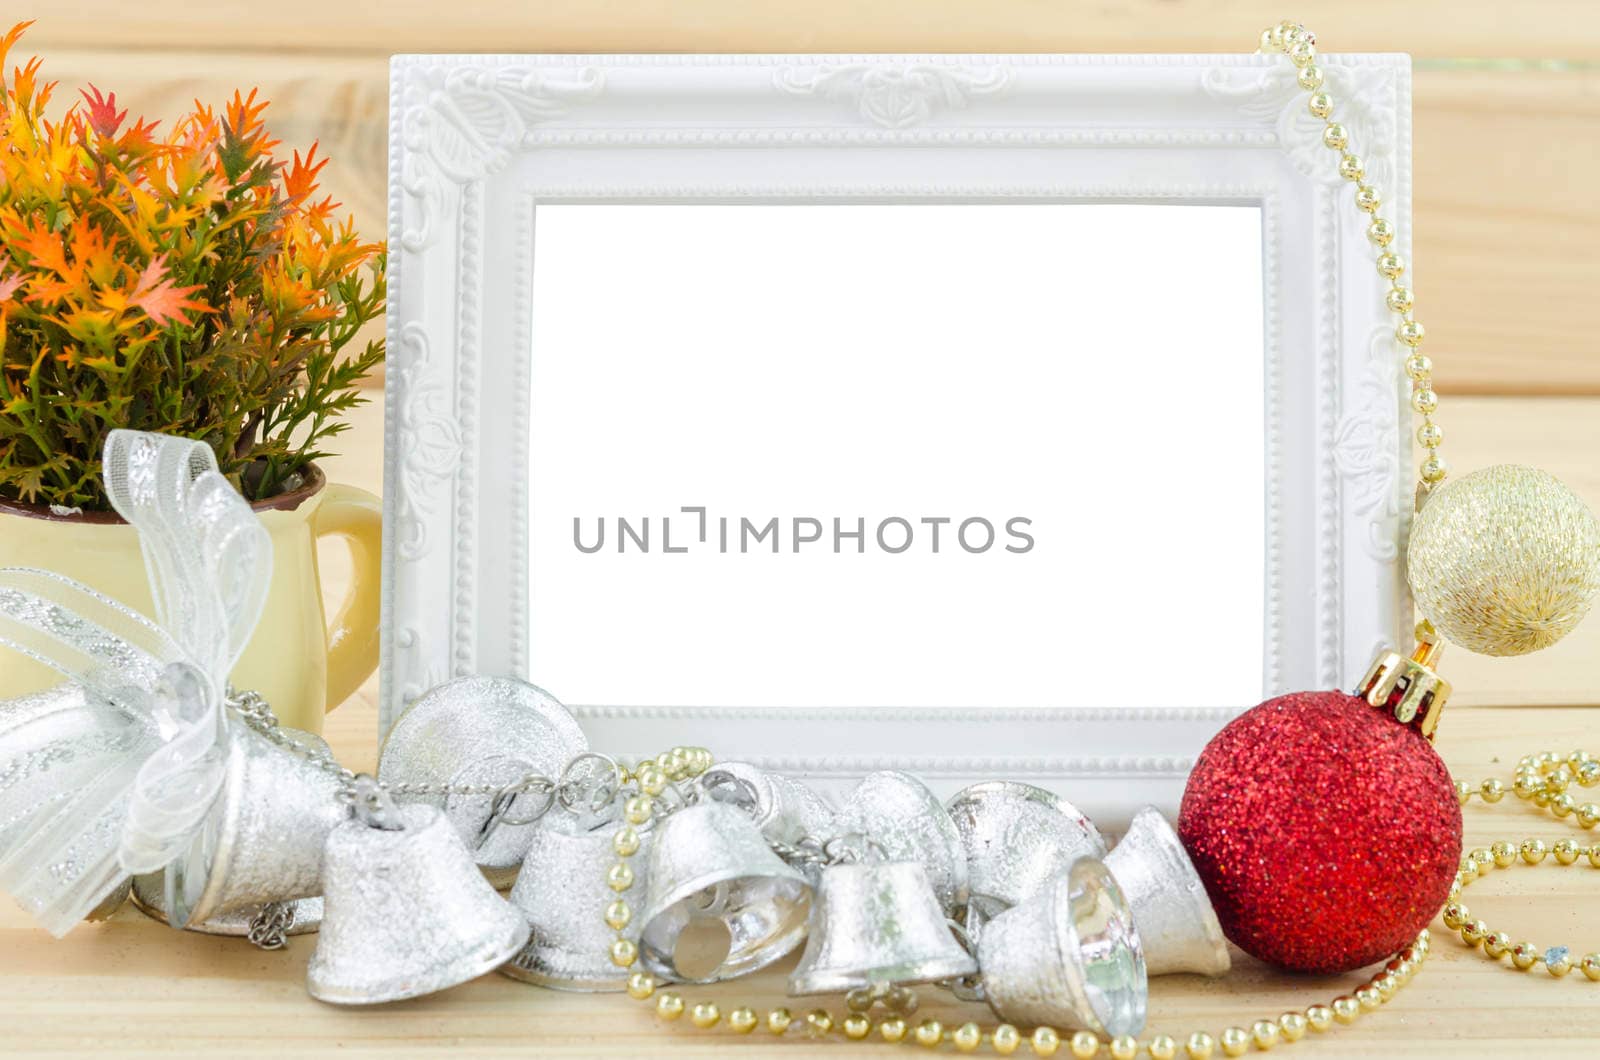 Vintage white blankk photo frame with chirstmas decorations on wood background. Save clipping path.